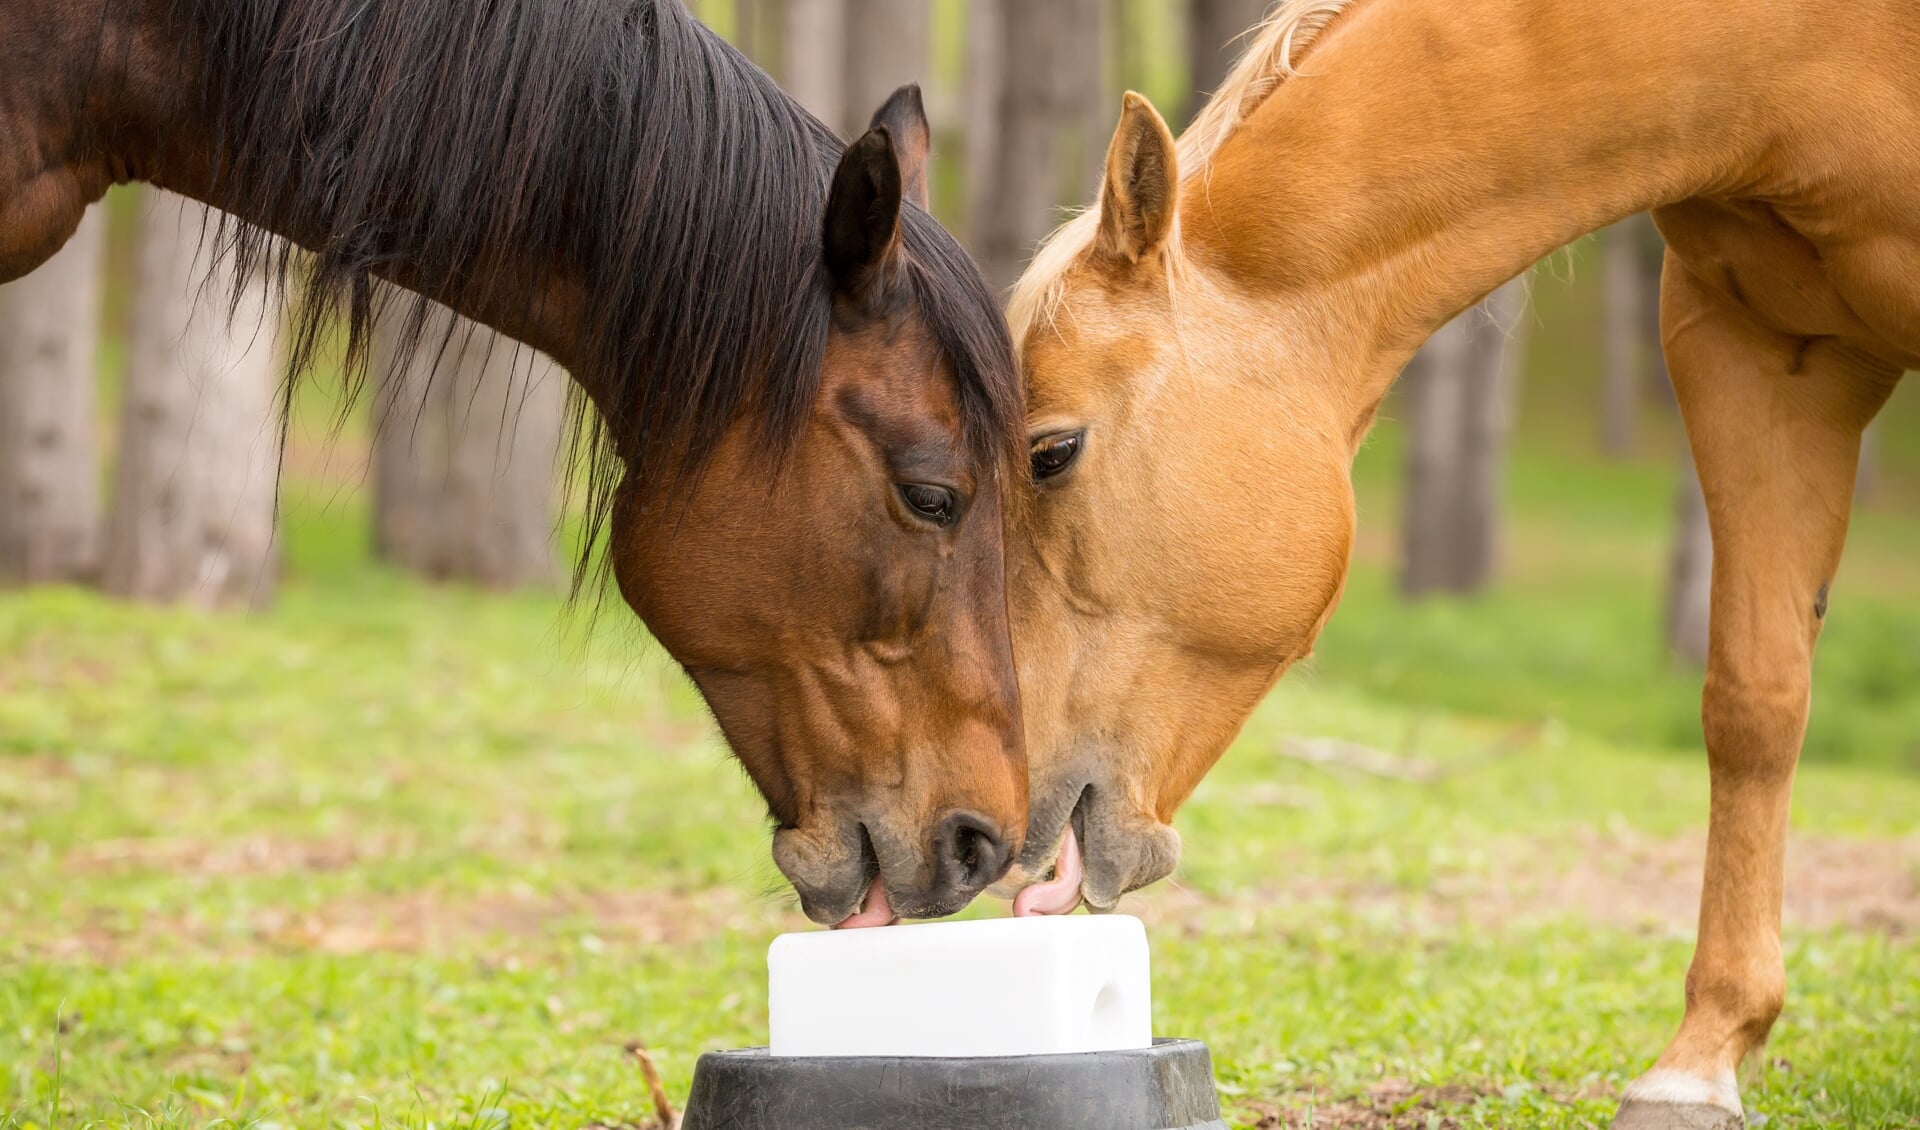 Two Quarter Horses licking on a new salt block. The horses are on opposite sides of the salt block and licking it with their heads next to each other. The horse on the left is a bay, the horse on the right is a palomino. Taken on a rainy springtime day on the ranch.